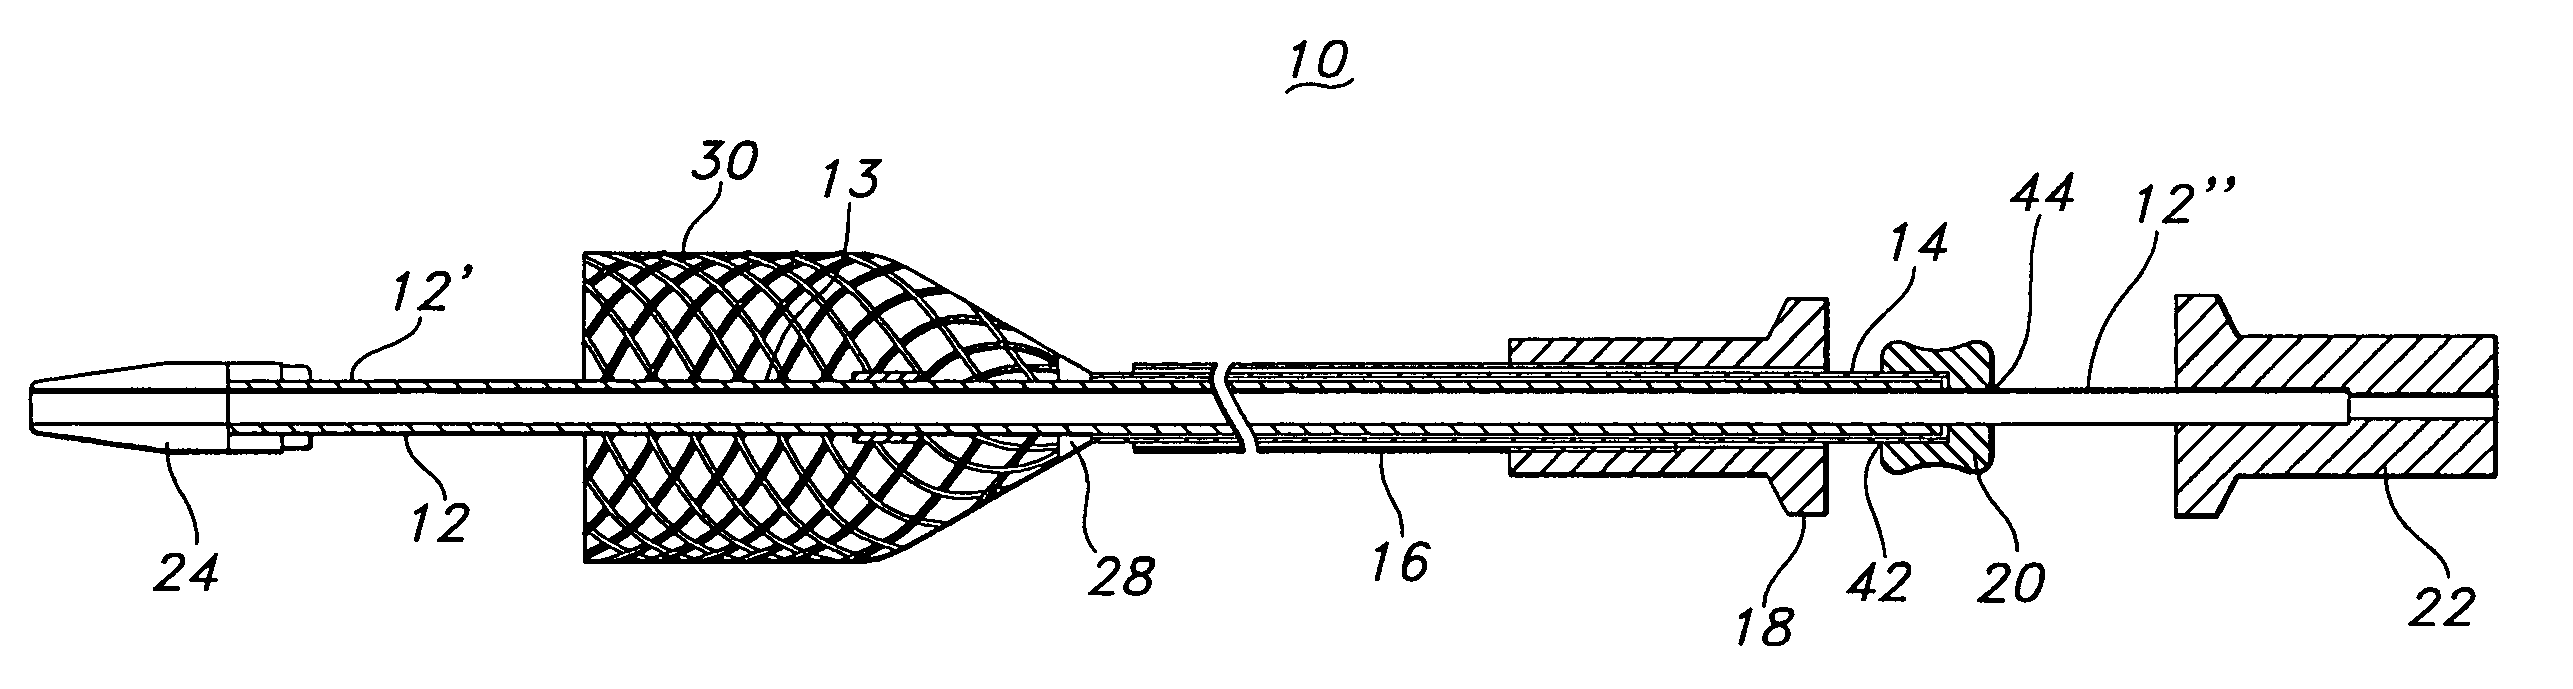 Apparatus and method for loading and delivering a stent